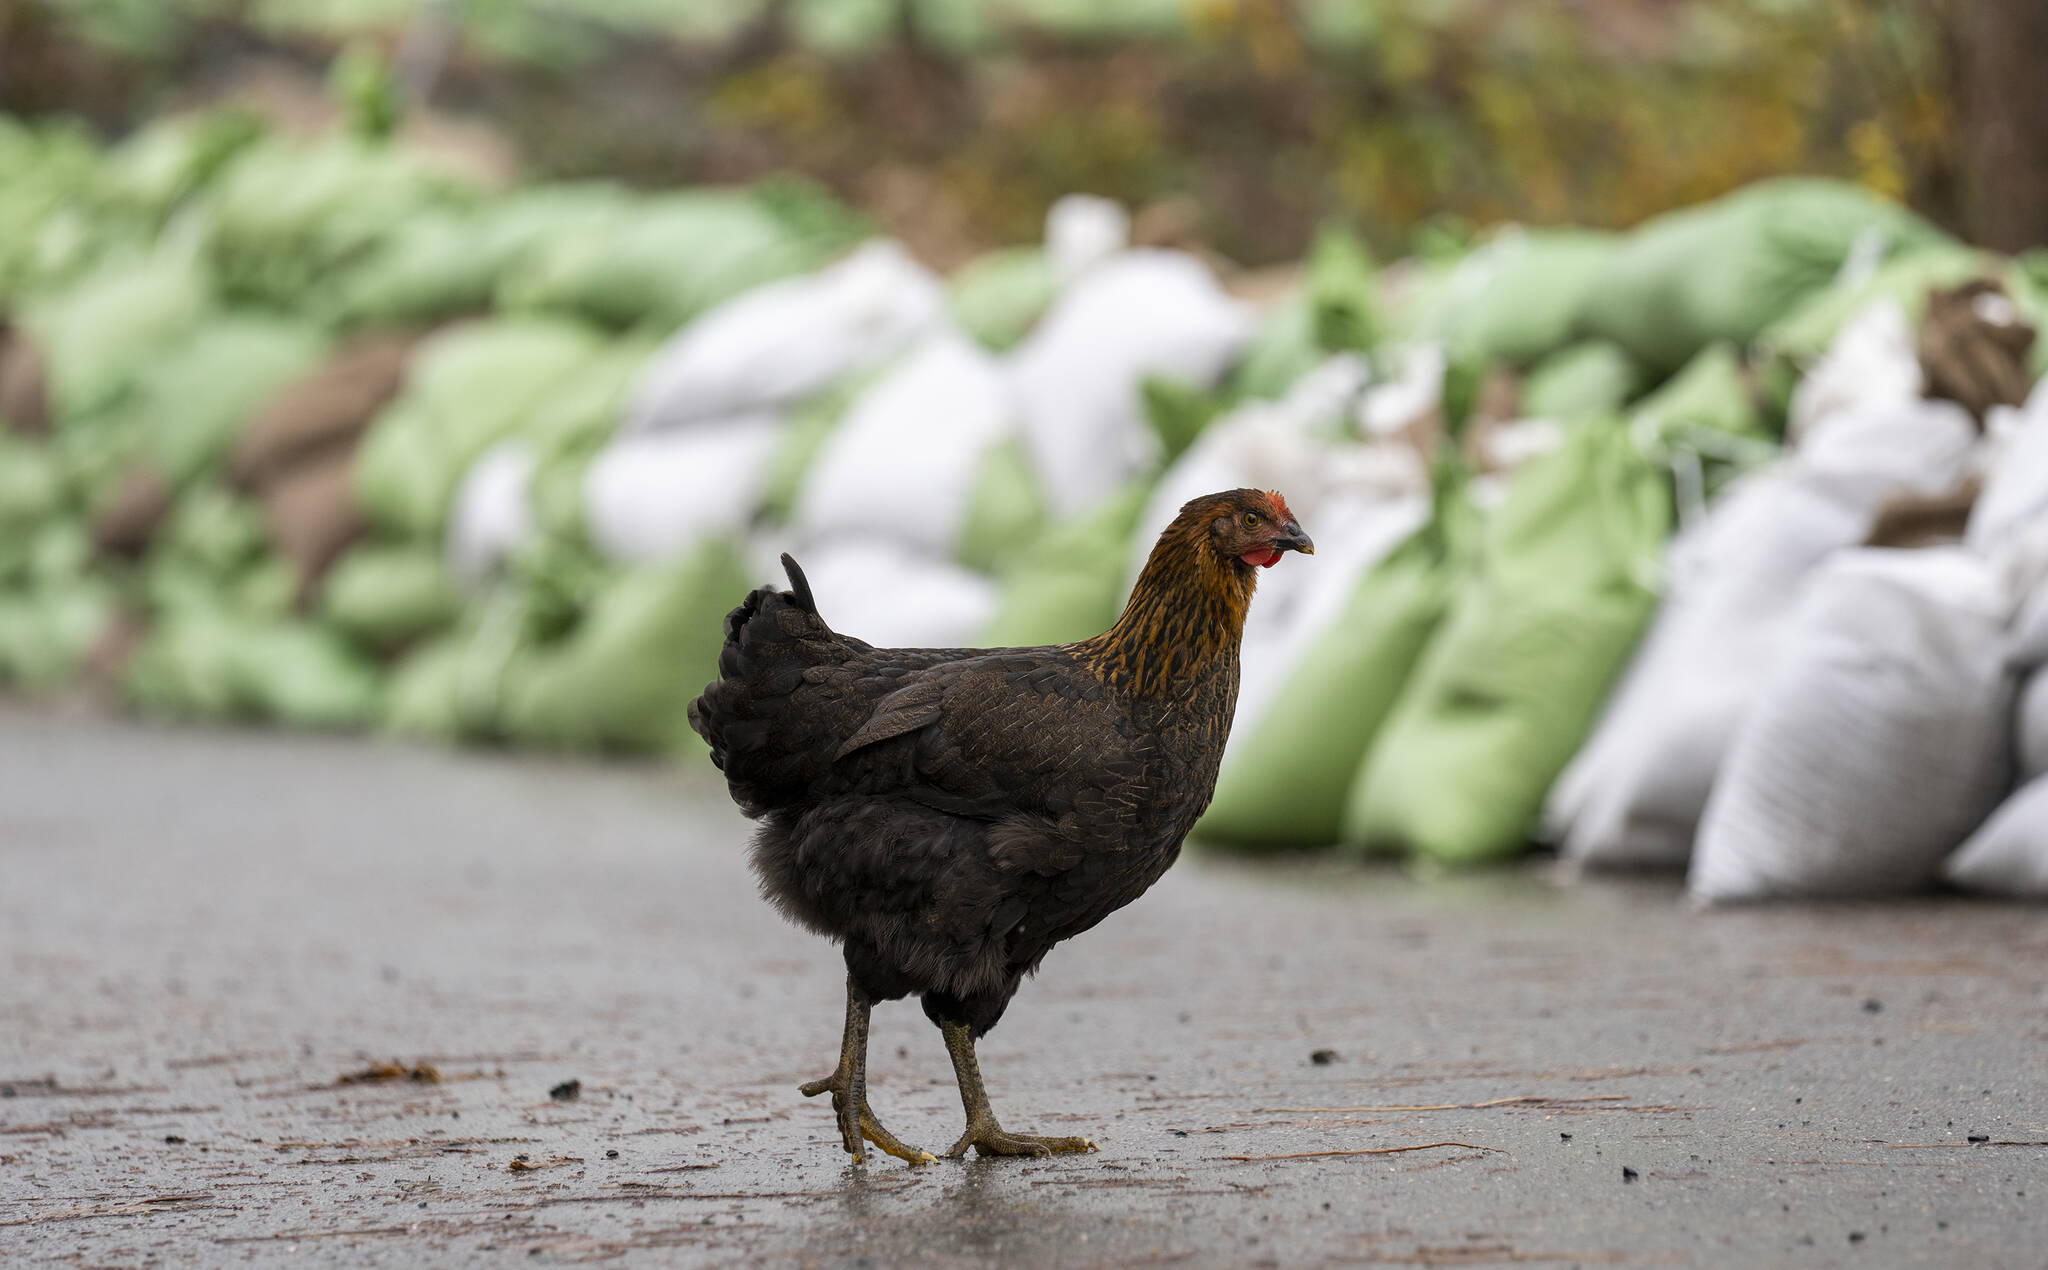 A chicken walks in front of a row of sandbags in Clayburn Village in Abbotsford, B.C., Monday, November 29, 2021. THE CANADIAN PRESS/Jonathan Hayward